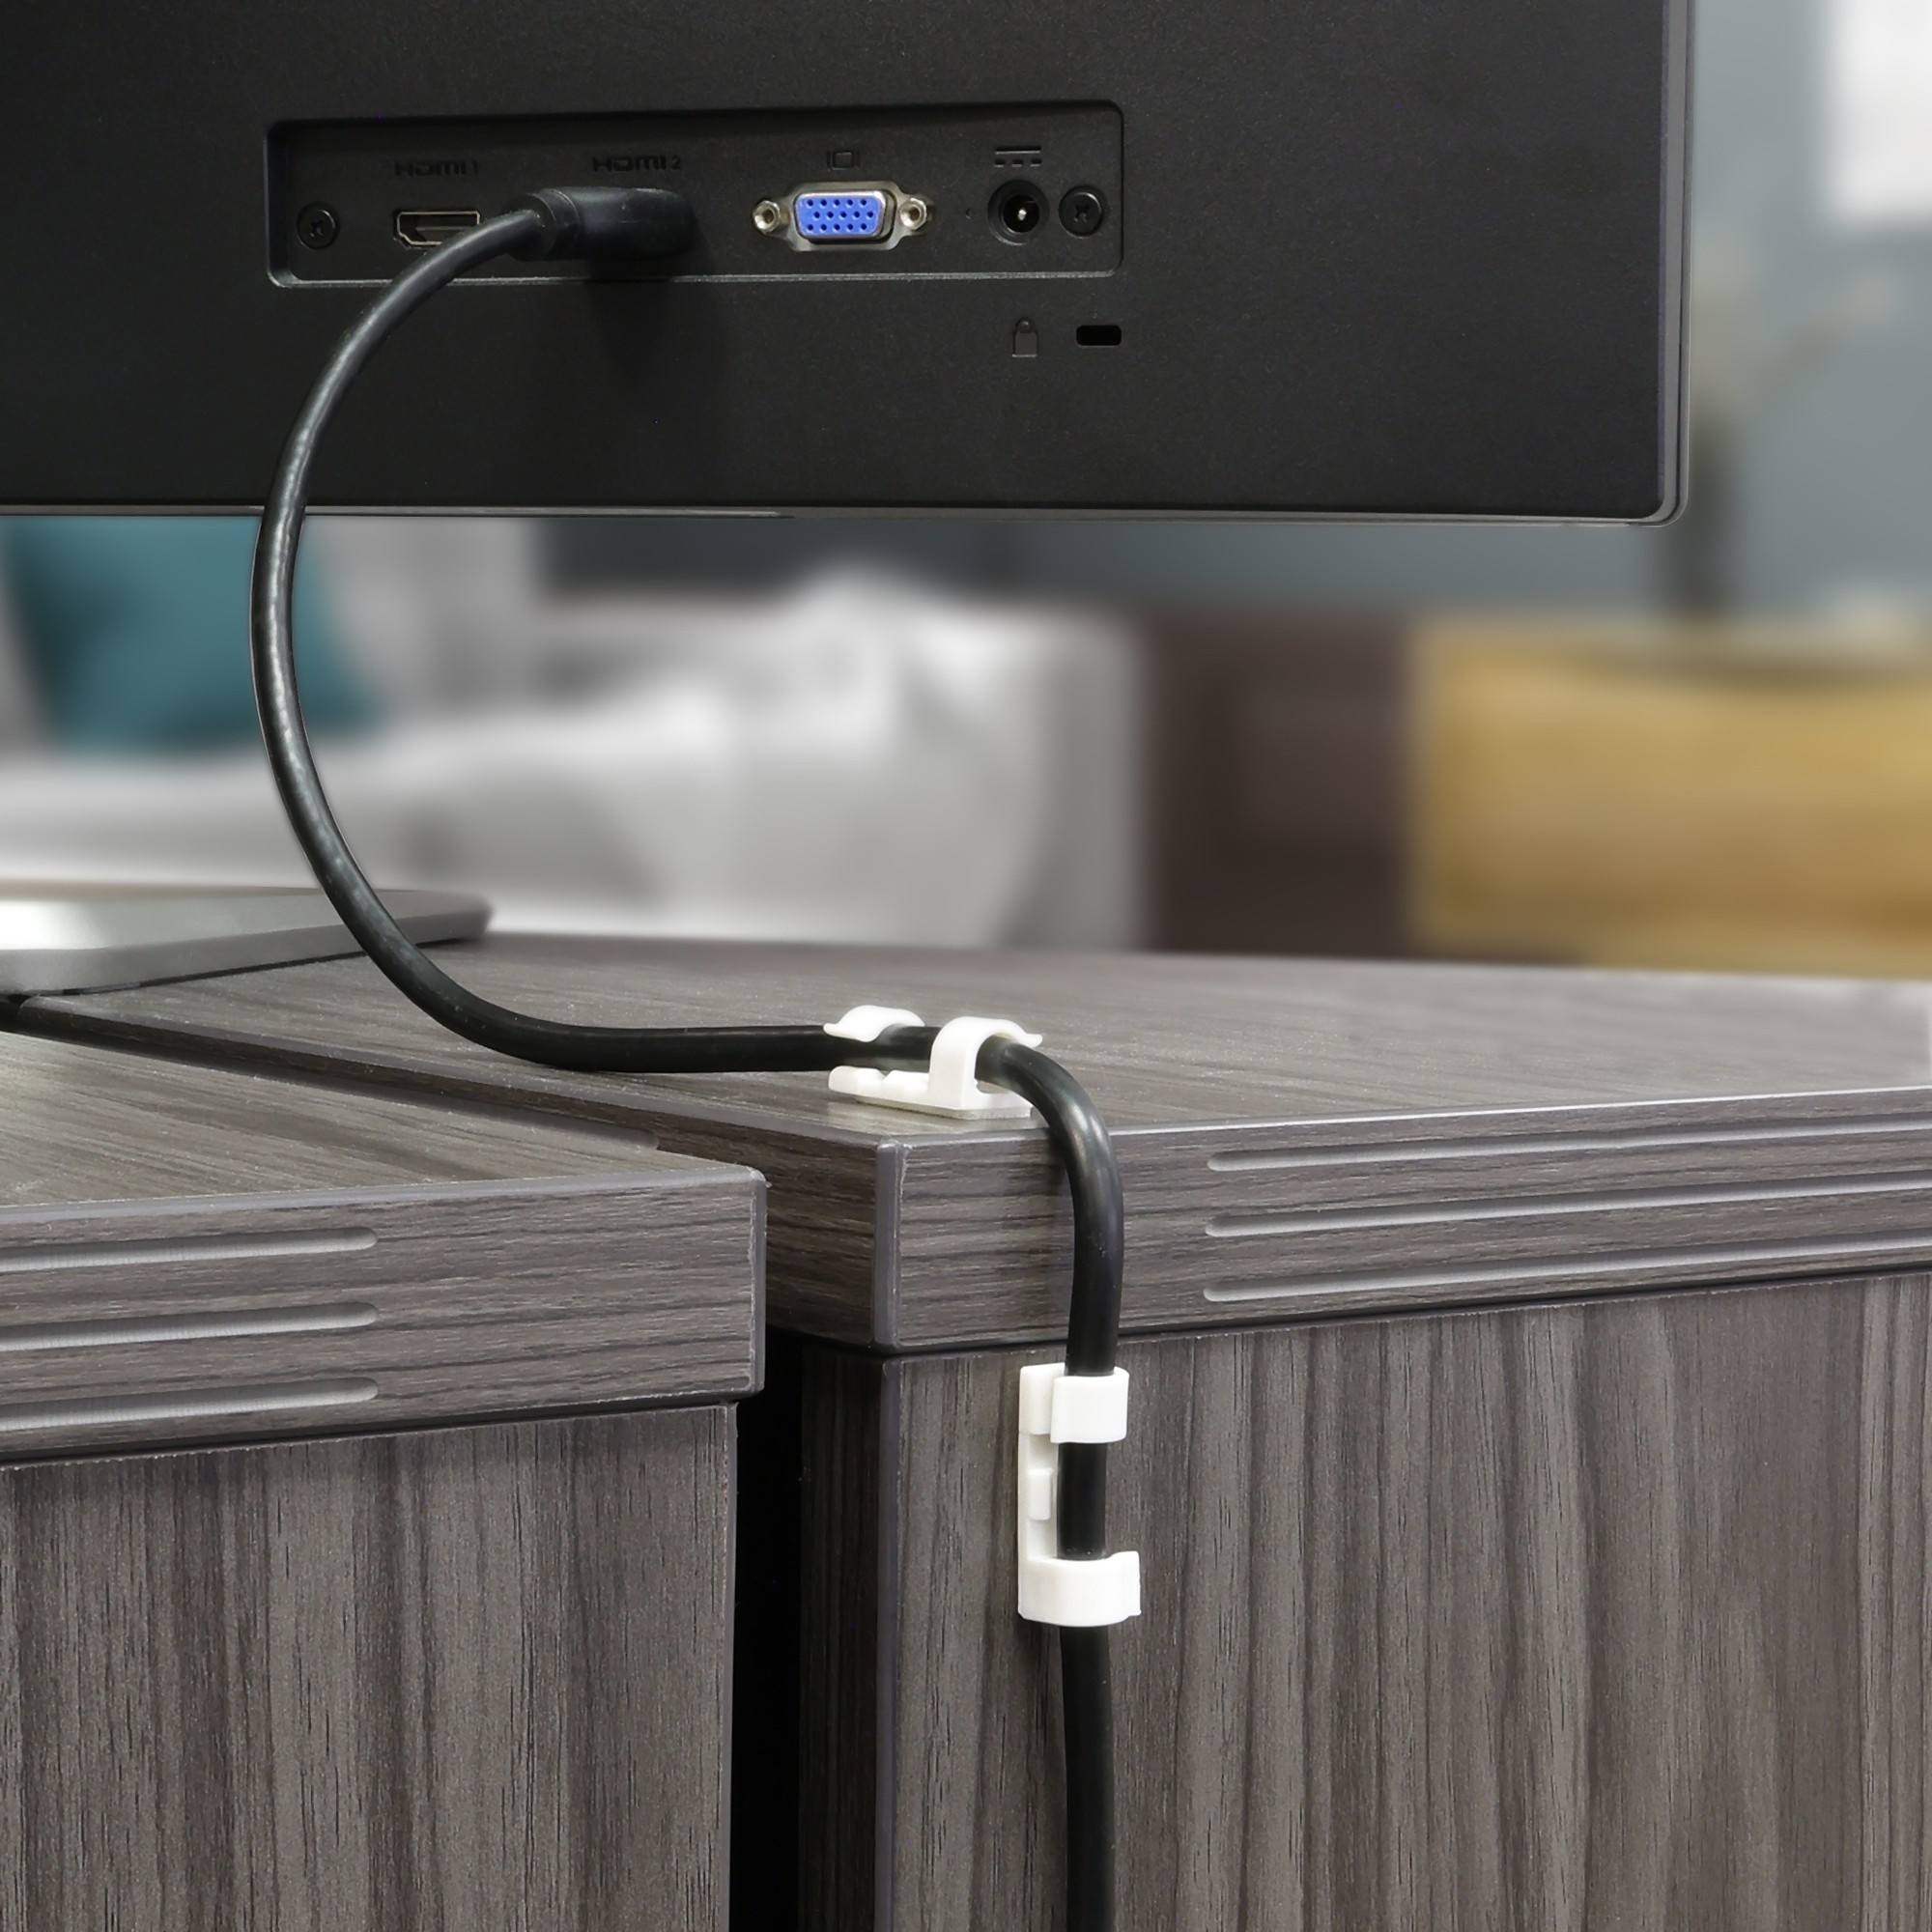 Cable management clip on a desk organizing wires, with a TV in the background